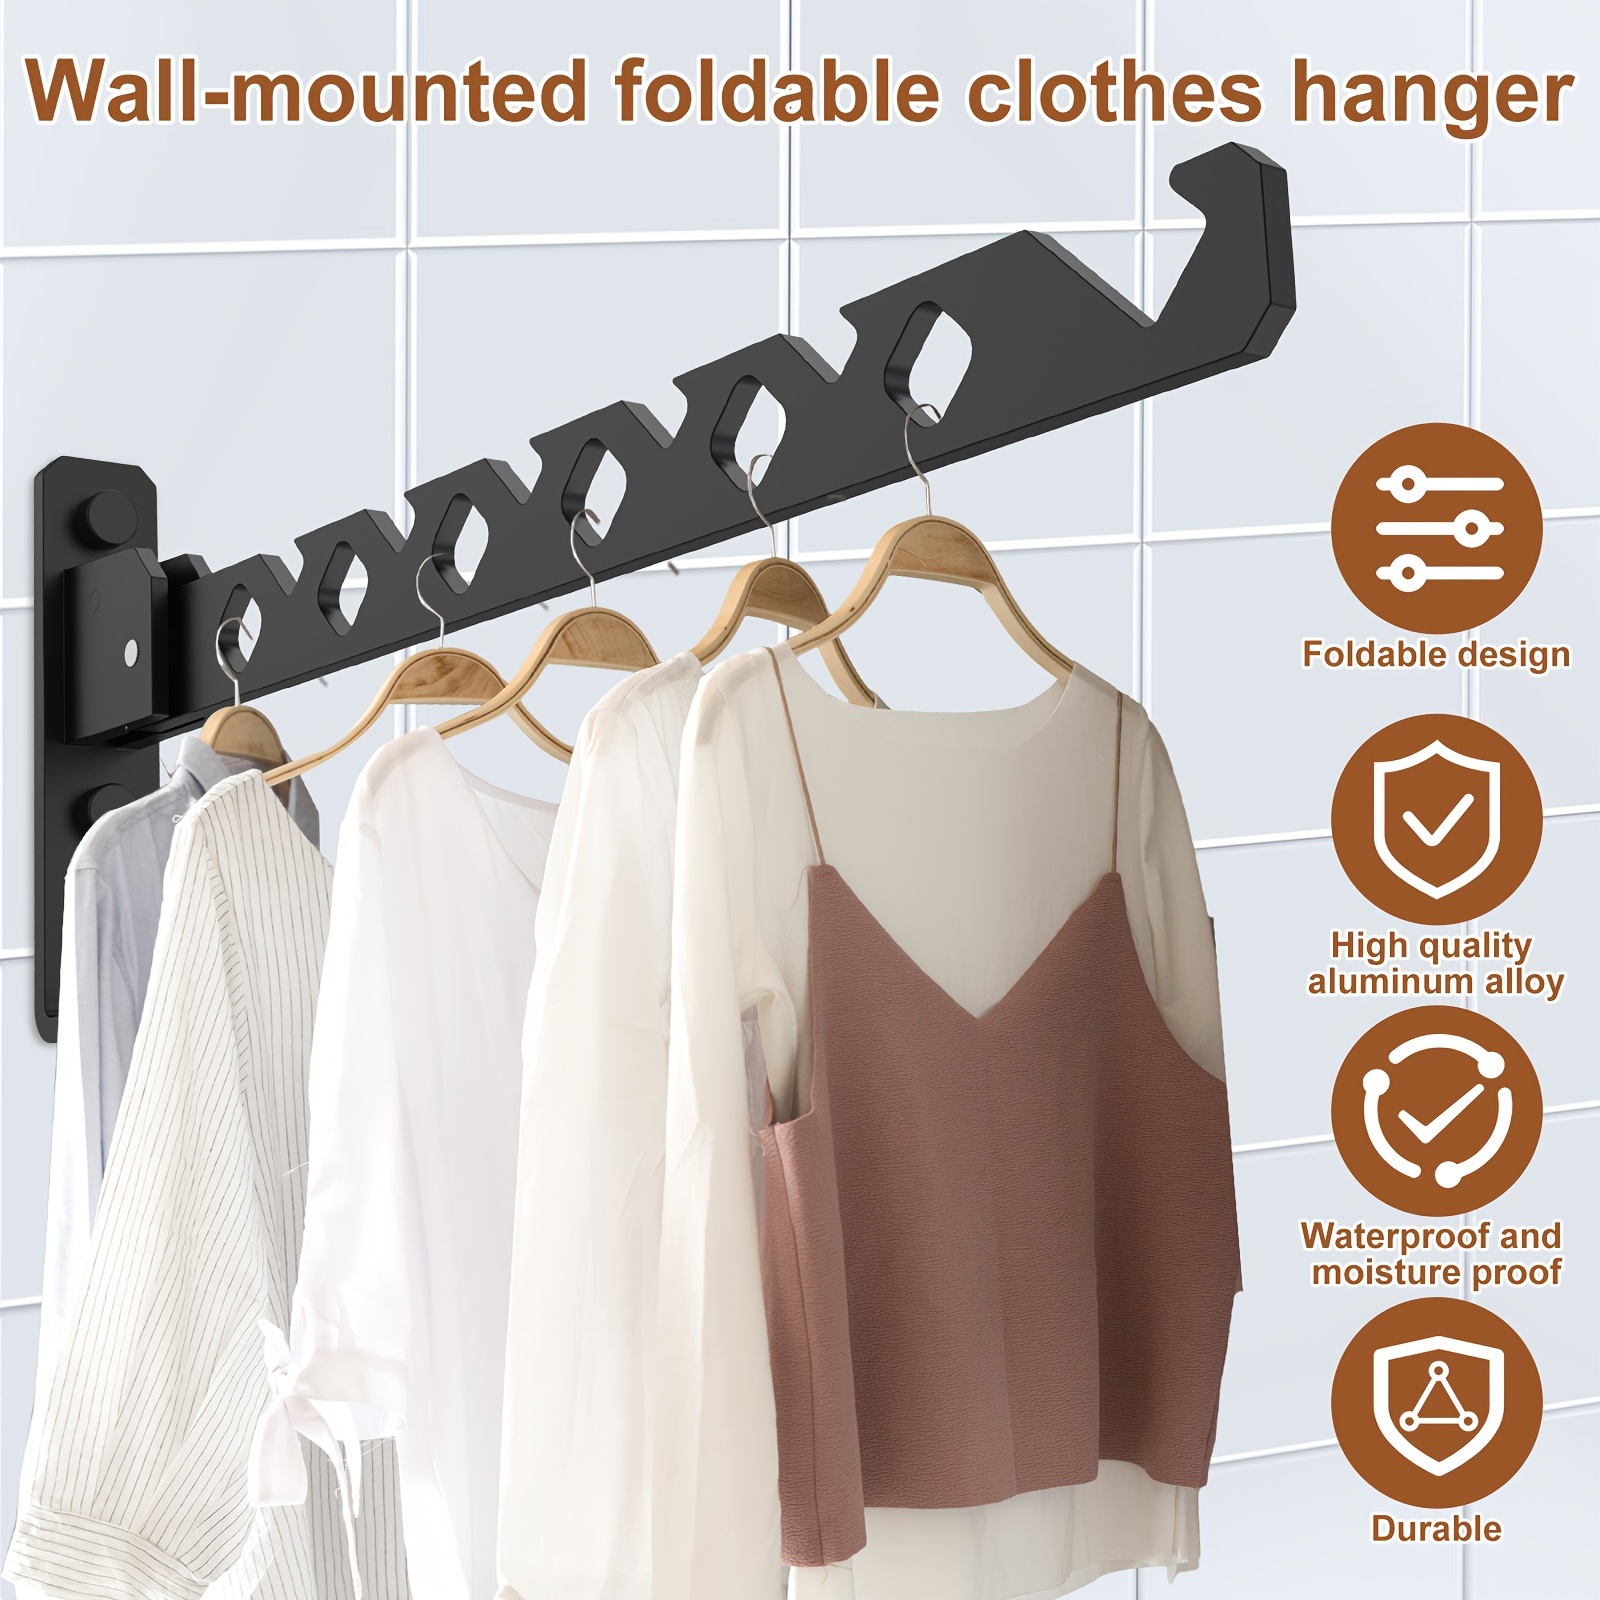 

2pcs Wall Mounted Clothes Drying Rack Aluminum Alloy Laundry Drying Rack With Screws 180°adjustable Clothes Drying Hanger Rust Resistant Clothes Drying Organizer Rack For Home Dorm